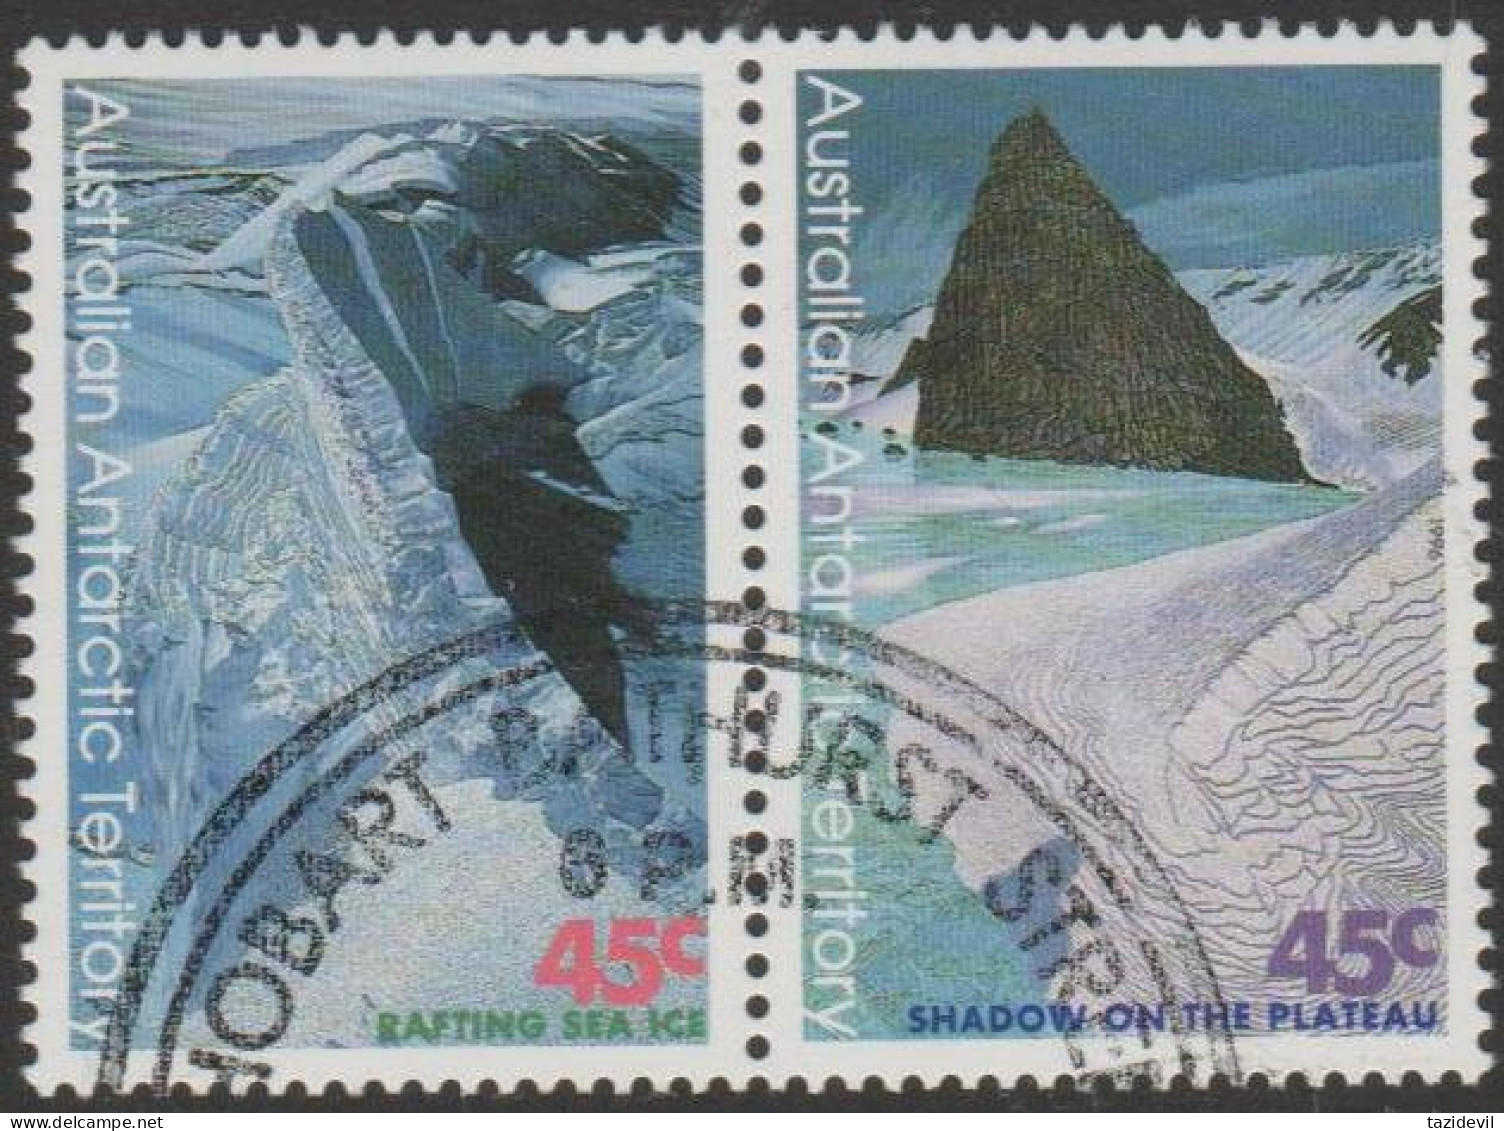 AUSTRALIALIAN ANTARCTIC TERRITORY-USED 1996 90c Se-tenant Pair - Landscapes - Used Stamps